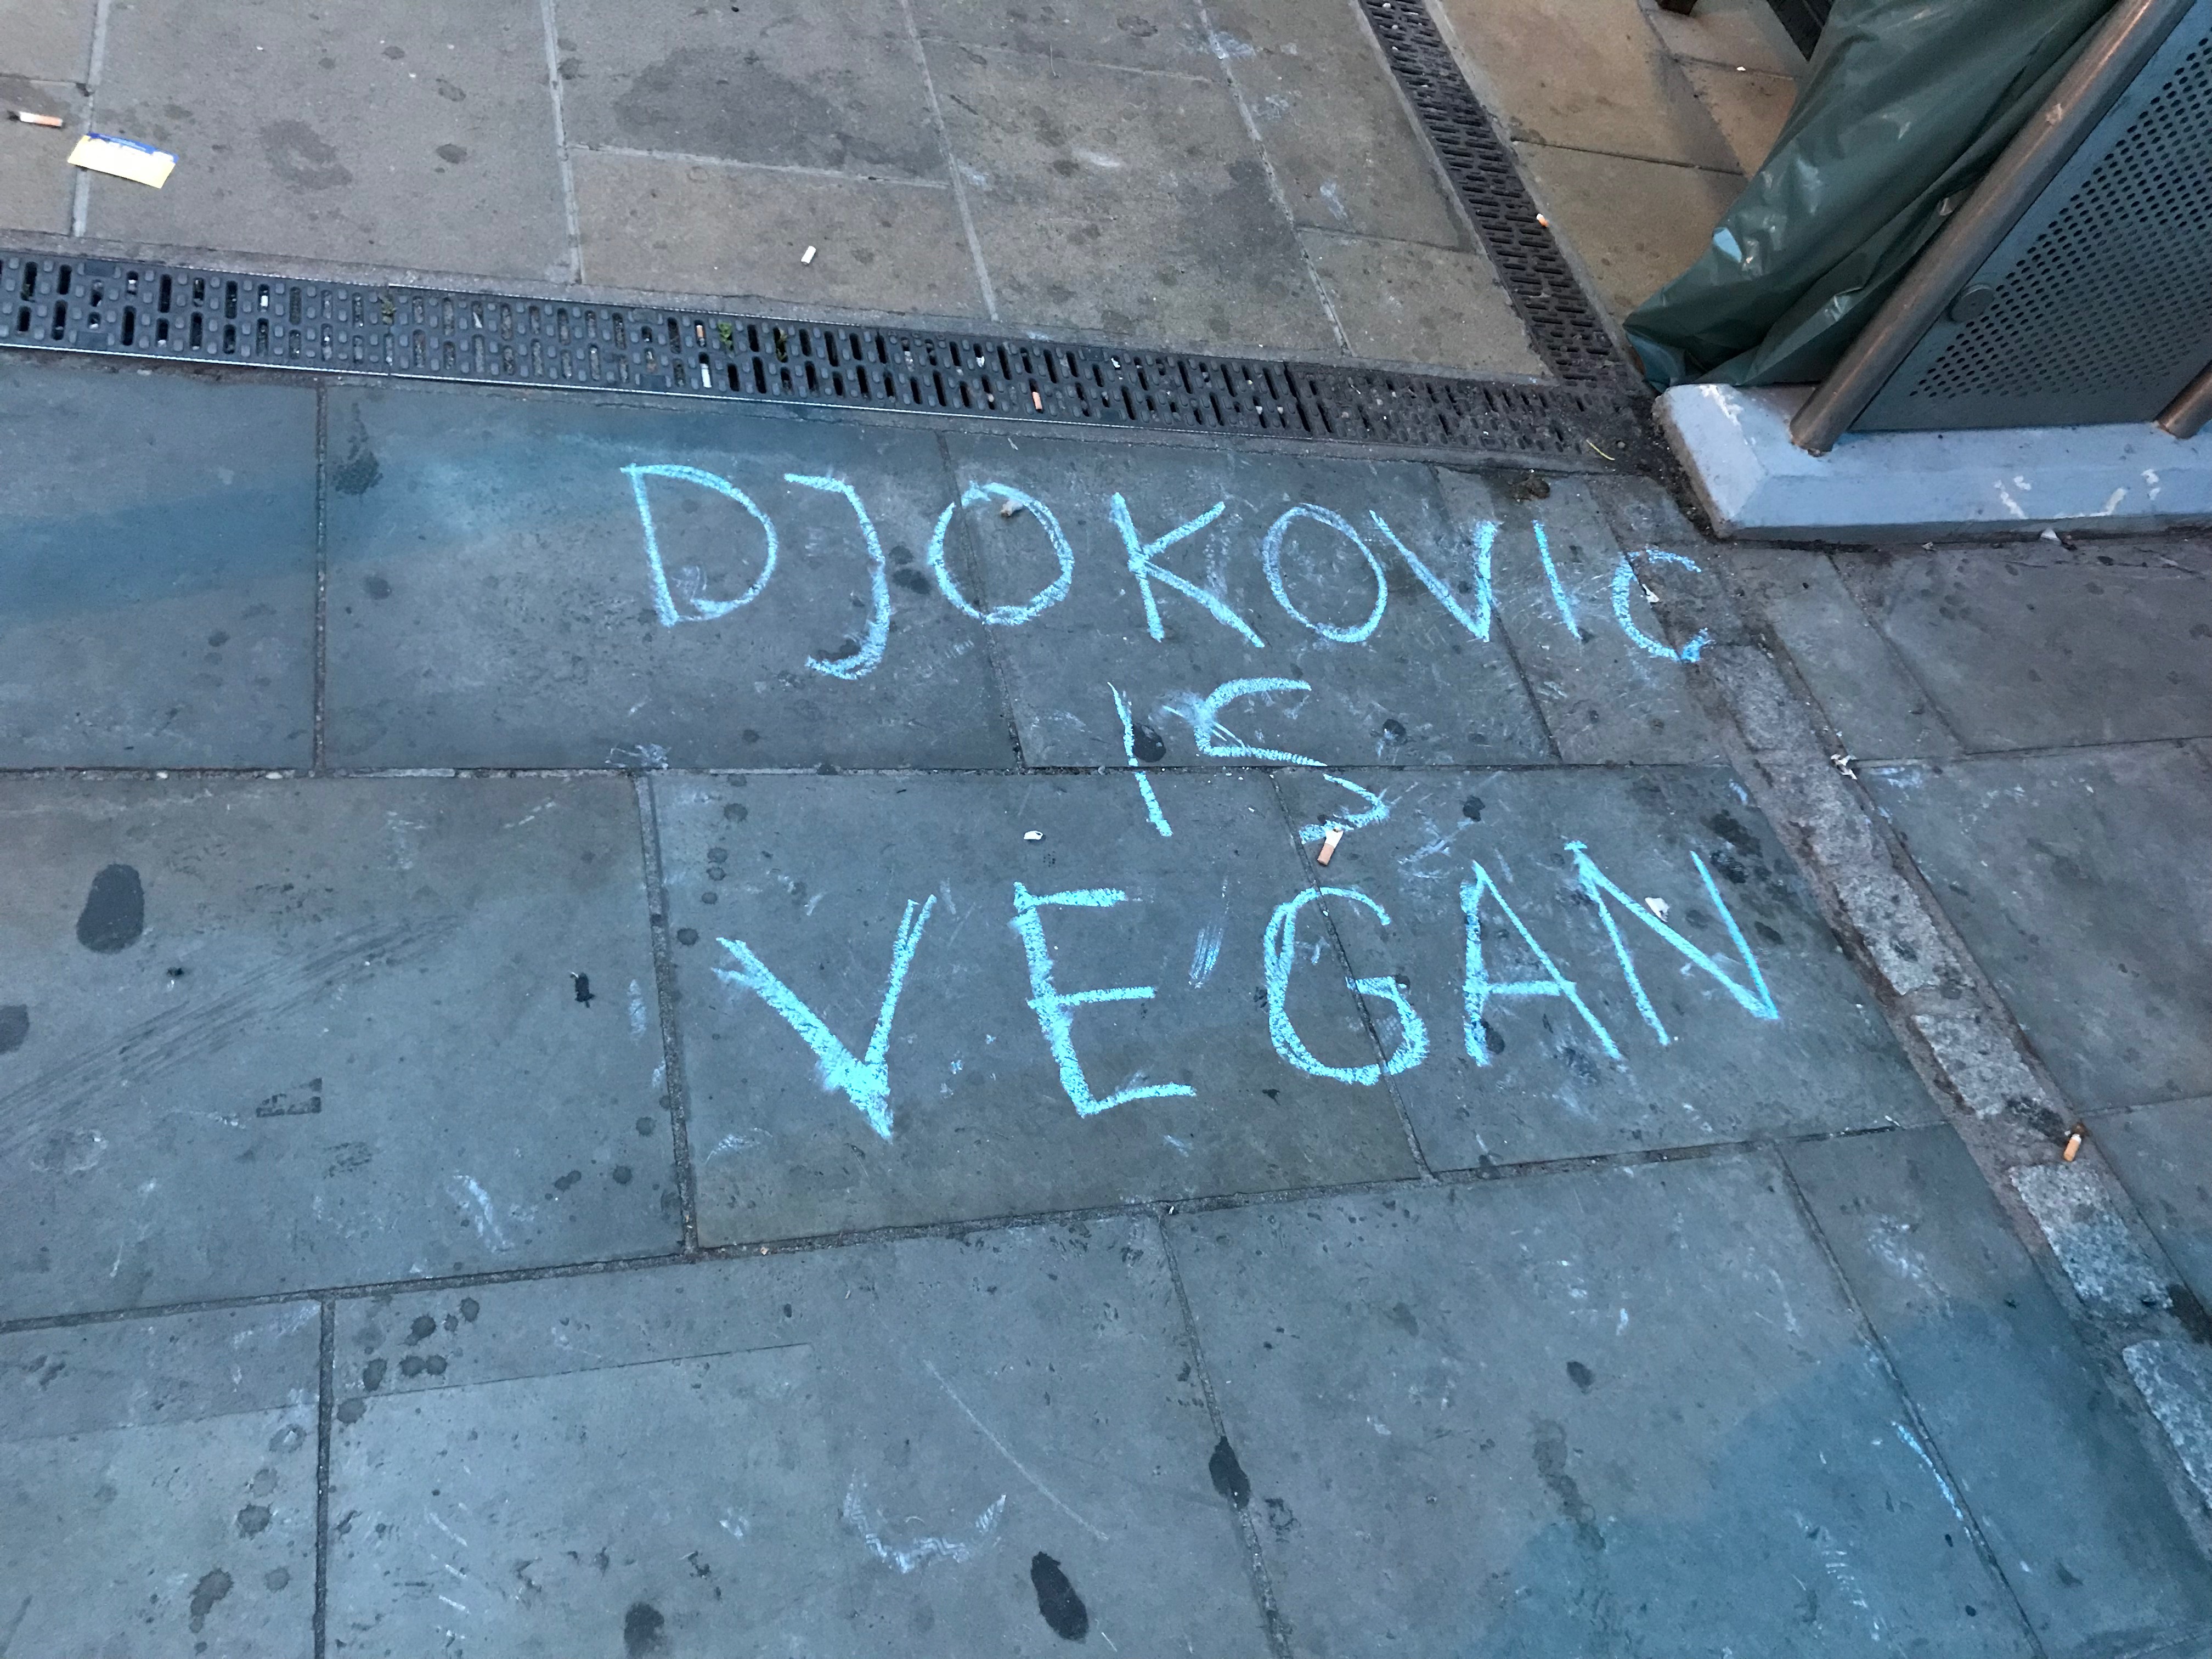 Vegan activists have been chalking “Djokovic is a vegan” around Wimbledon Station of the course of the tournament 